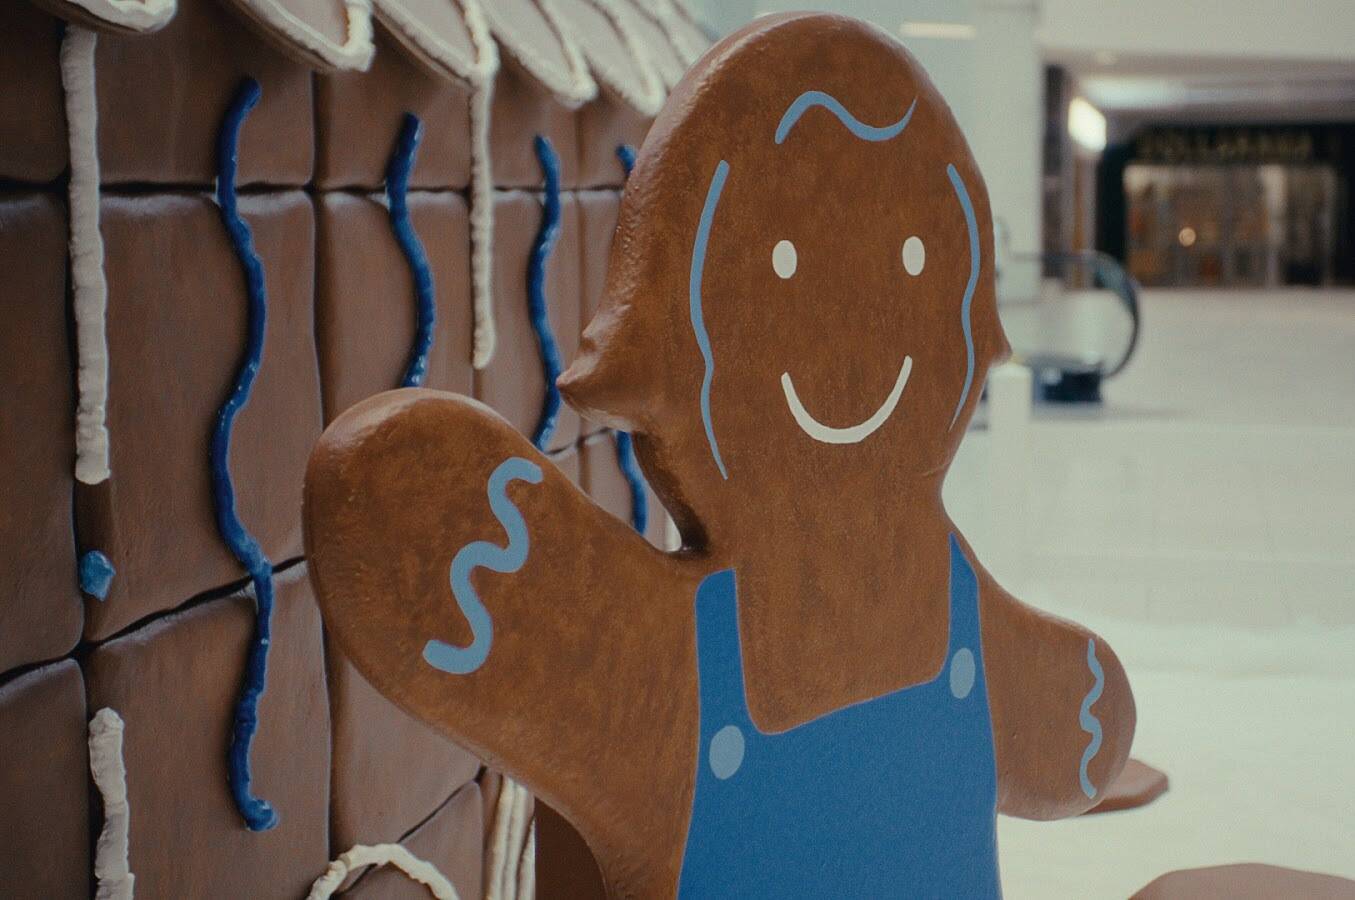 A gingerbread barn was created in a West Vancouver mall as part of a campaign by BC Dairy to raise money for BC Children's Hospital. (Submitted)